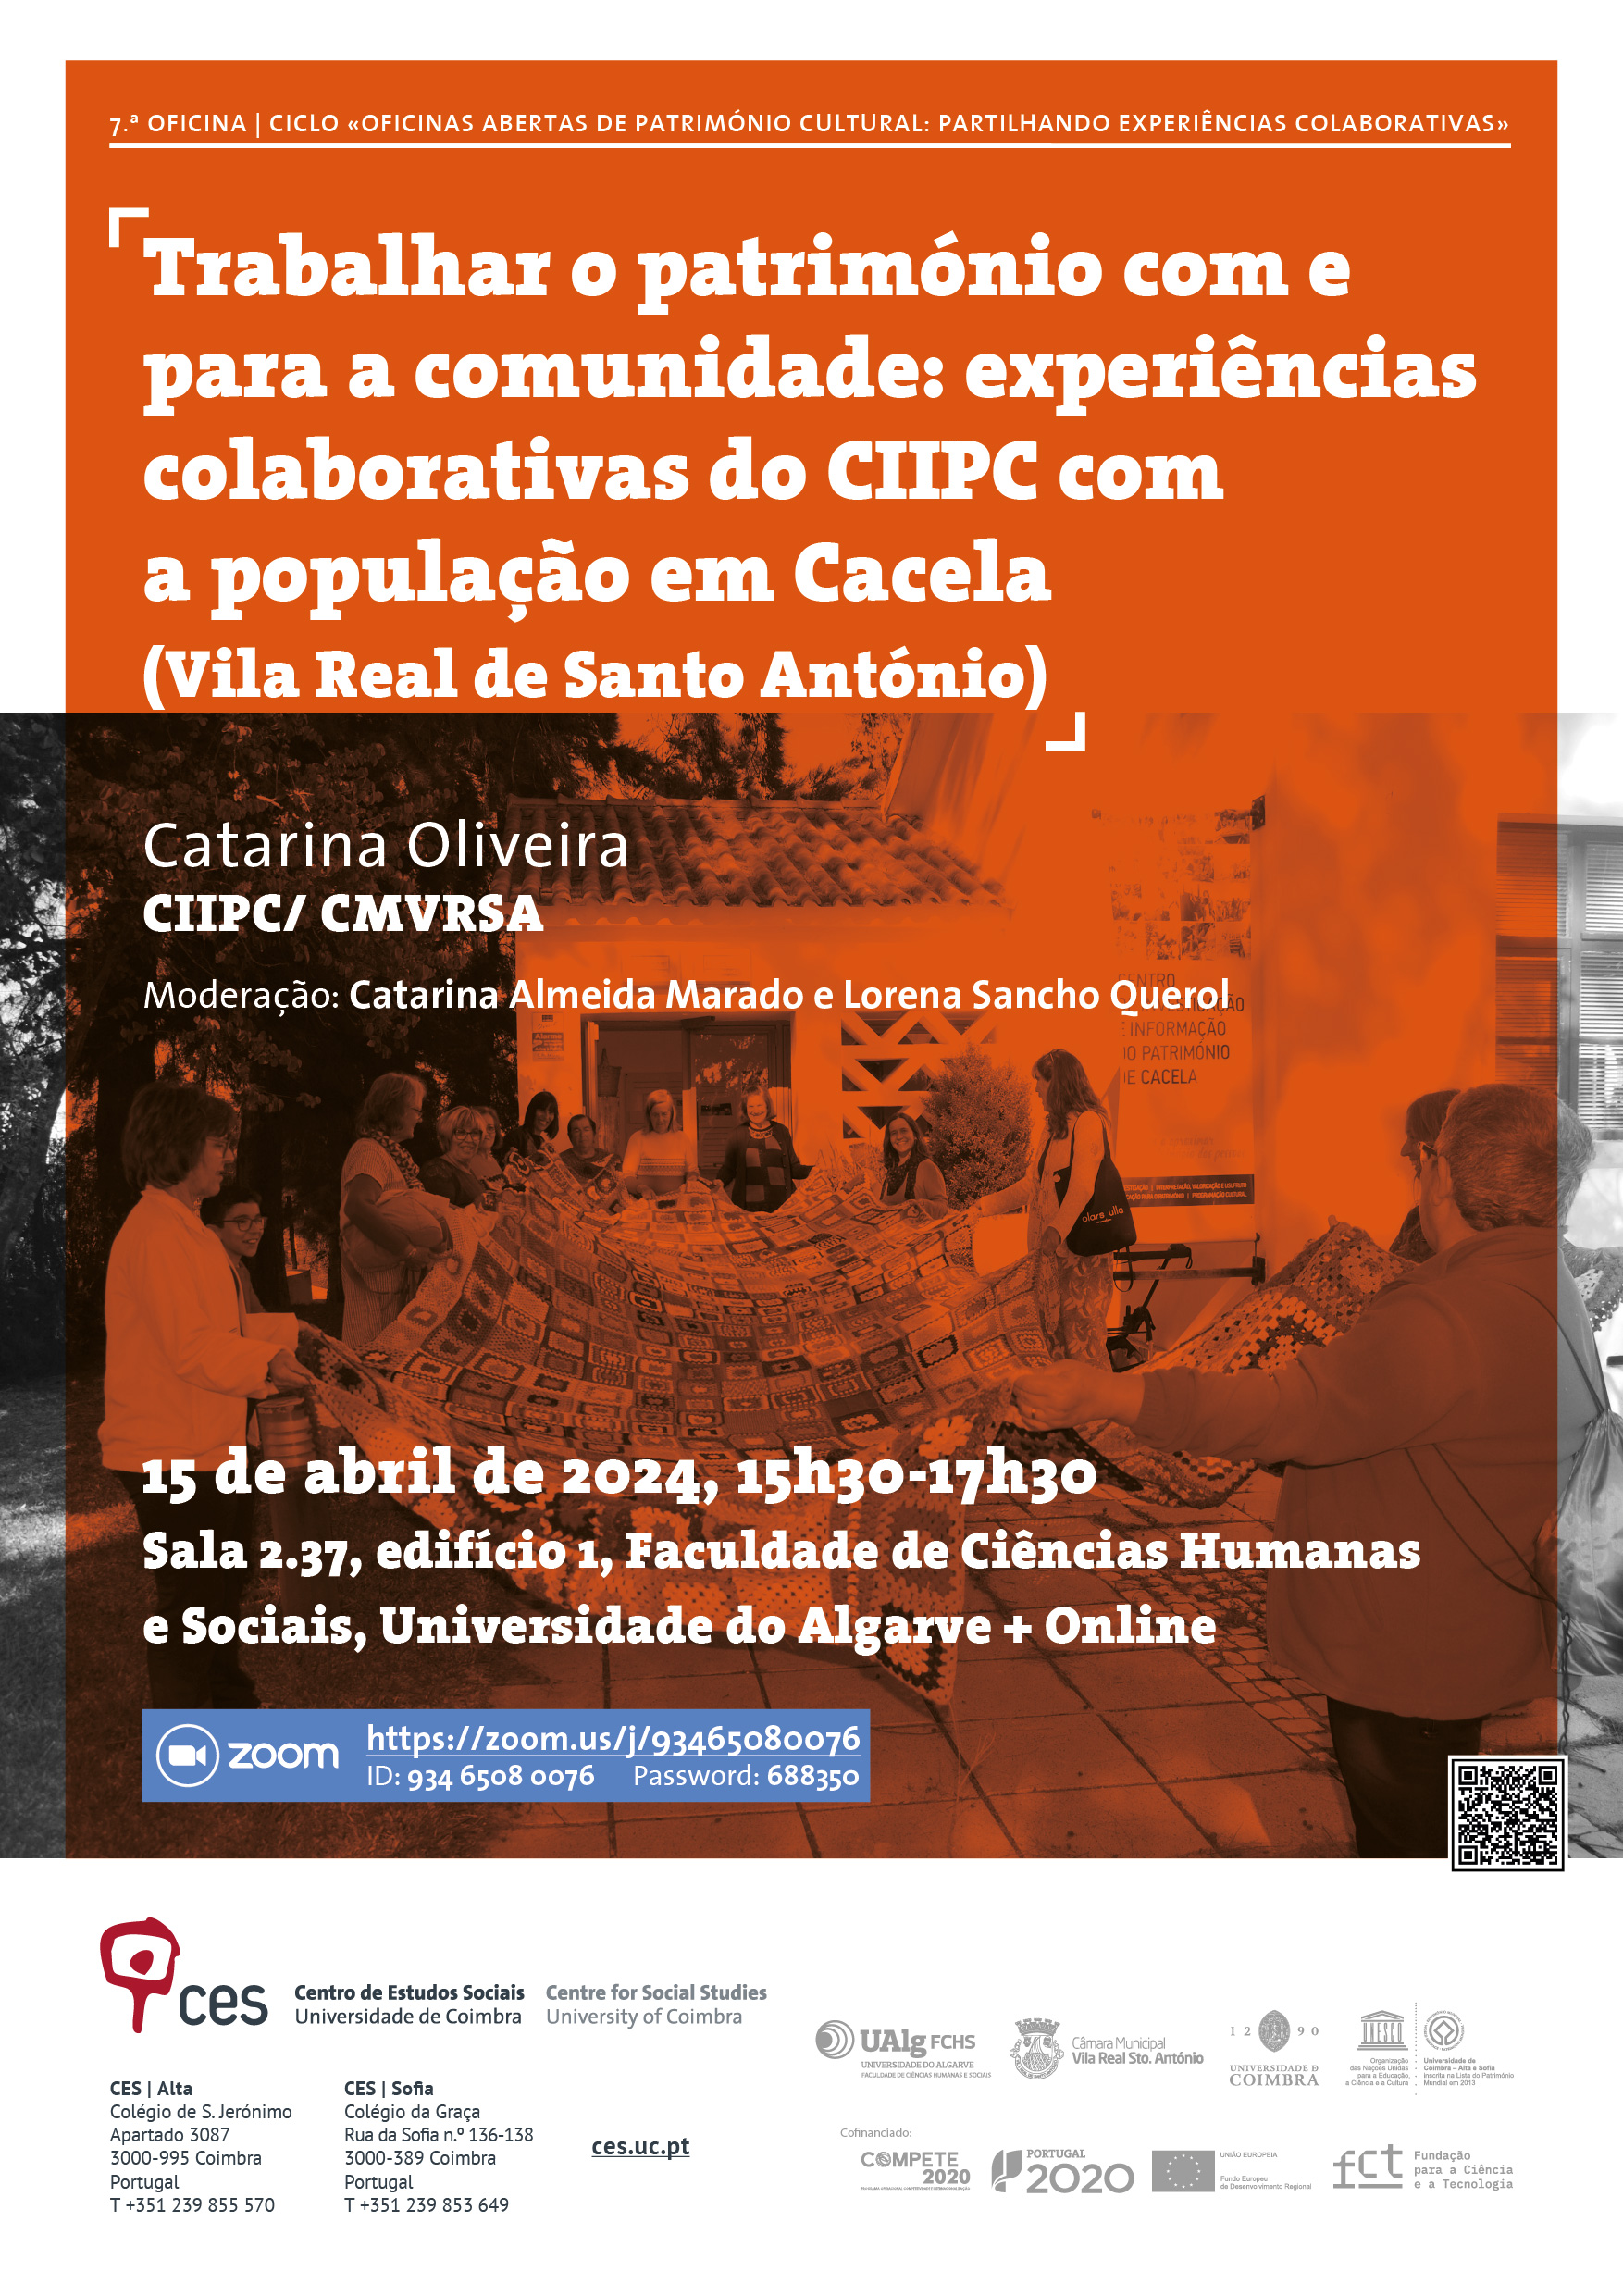 7th WORKSHOP | Working heritage with and for the community: CIIPC's collaborative experiences with the population in Cacela (Vila Real de Santo António)<span id="edit_45638"><script>$(function() { $('#edit_45638').load( "/myces/user/editobj.php?tipo=evento&id=45638" ); });</script></span>